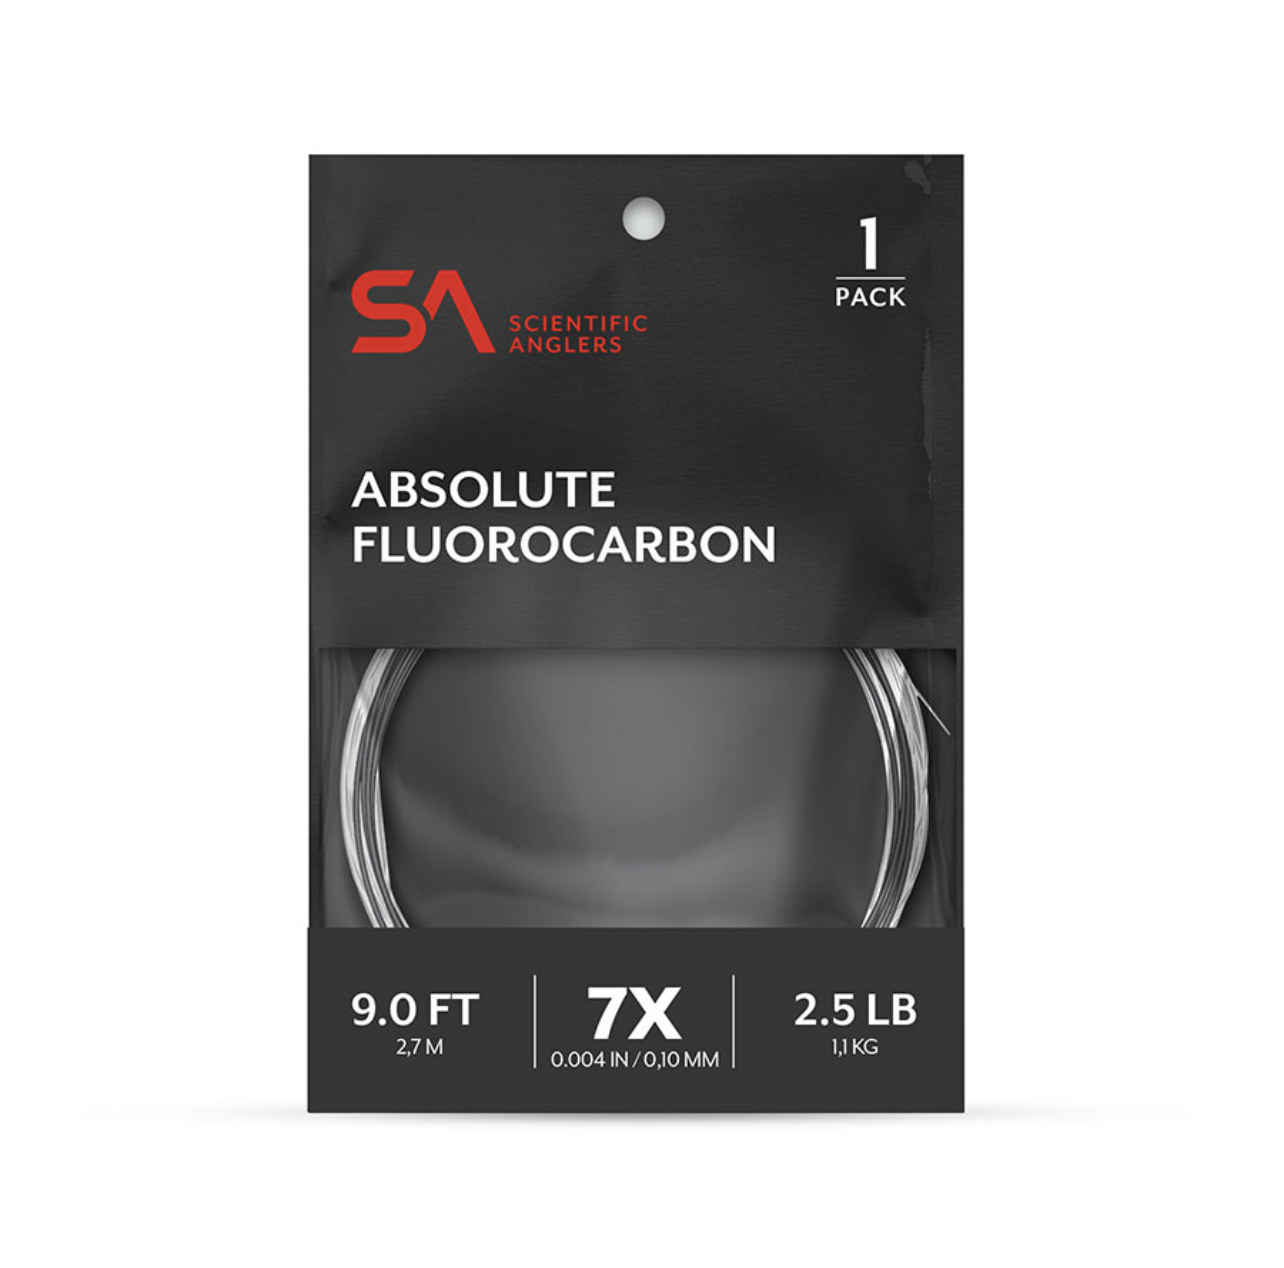 Scientific Anglers Absolute Fluorocarbon Leader - 9ft - 1X - 11.8lb